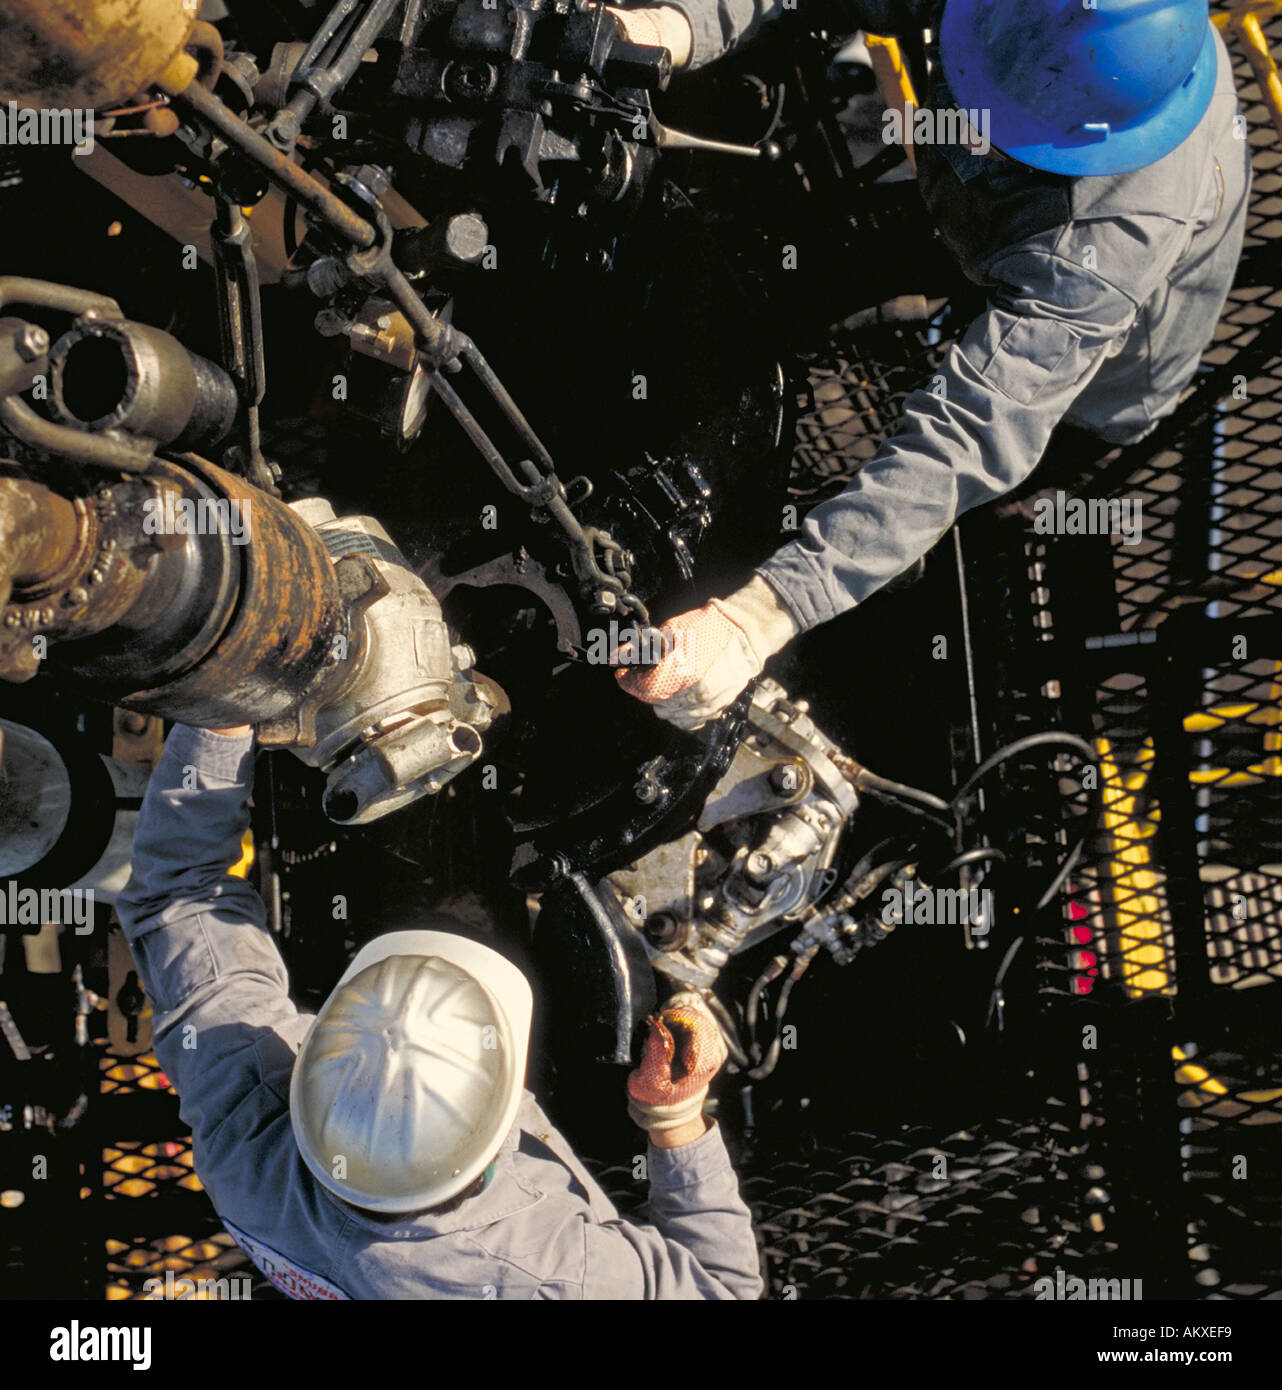 Overhead view of roughnecks on oil drilling platform Stock Photo